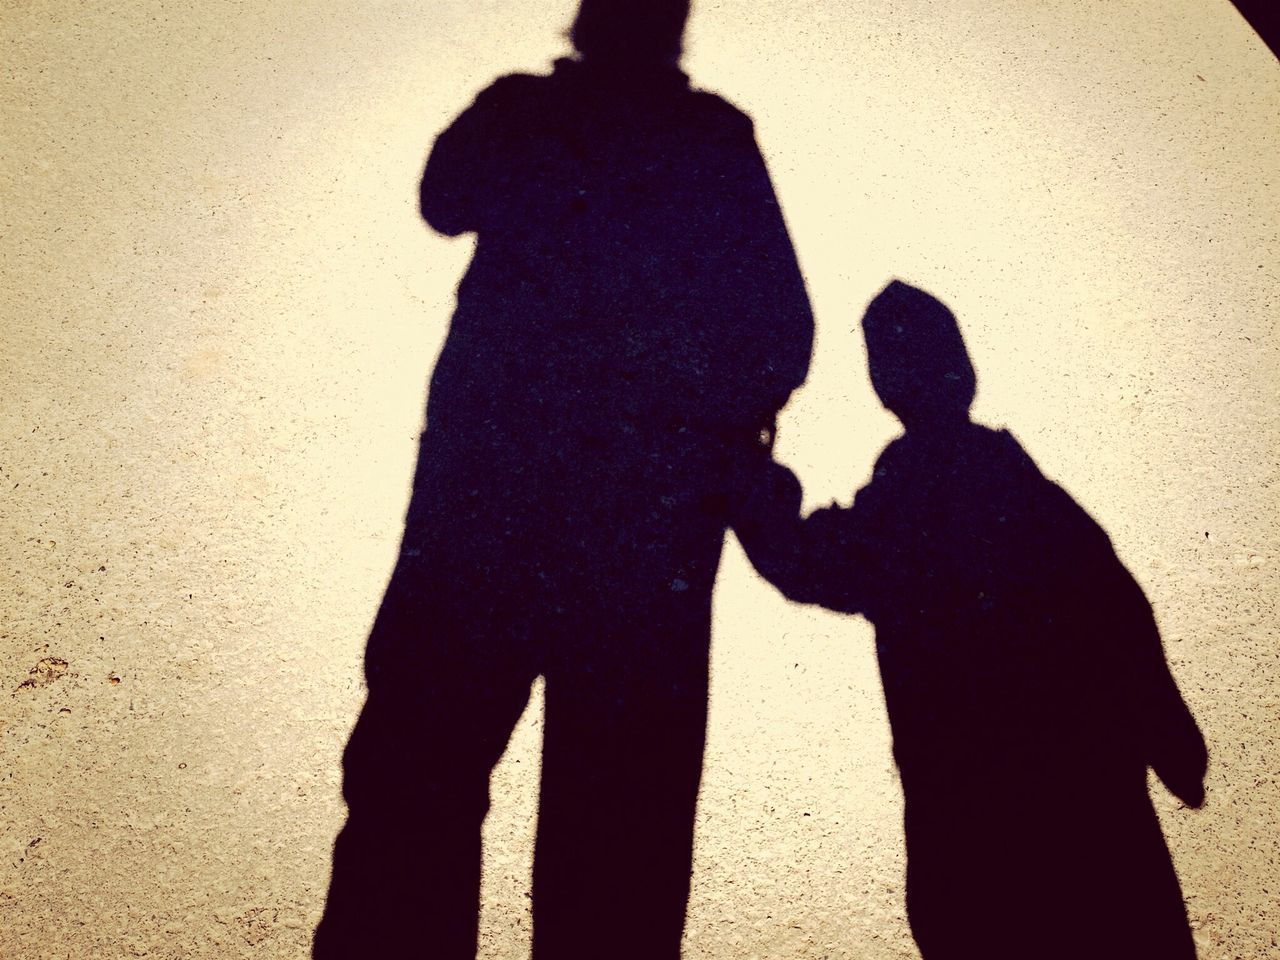 shadow, silhouette, focus on shadow, lifestyles, leisure activity, standing, three quarter length, men, sunlight, high angle view, togetherness, bonding, love, outline, wall - building feature, night, gesturing